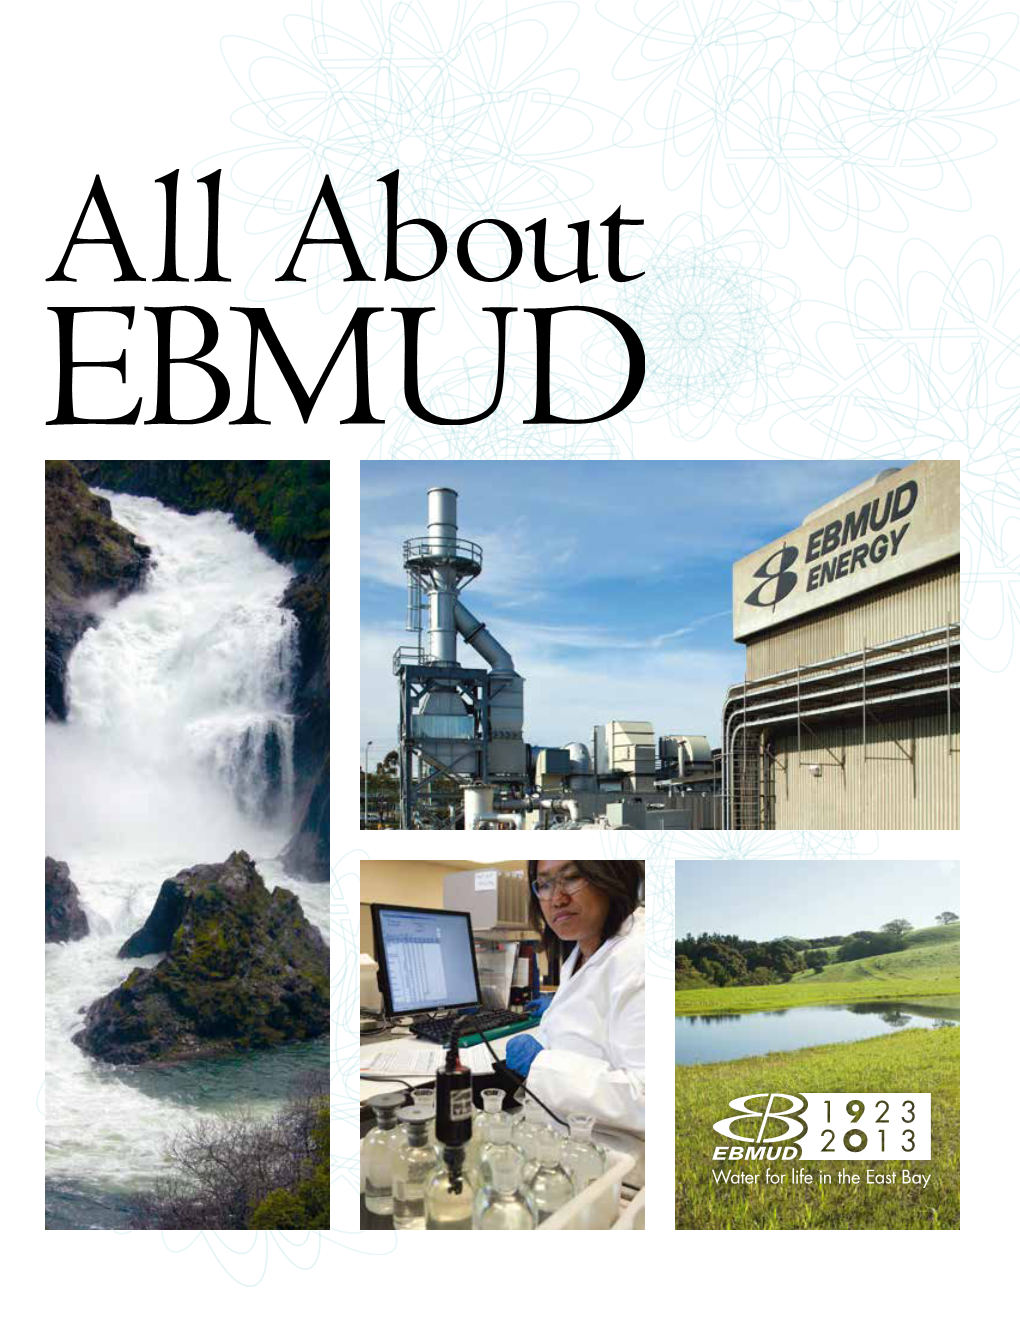 All About EBMUD